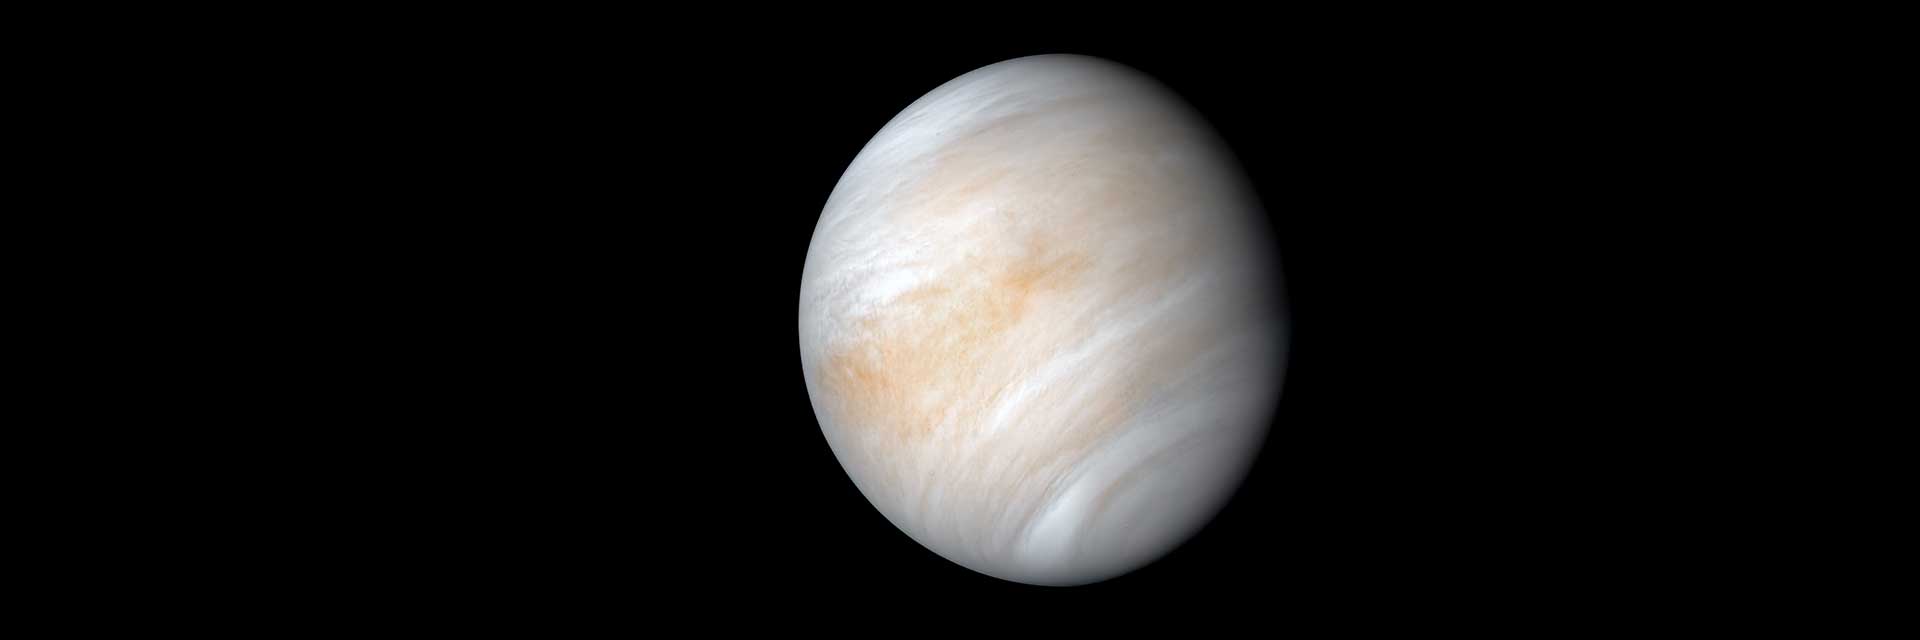 Creamy-colored, cloudy Venus as seen from a spacecraft